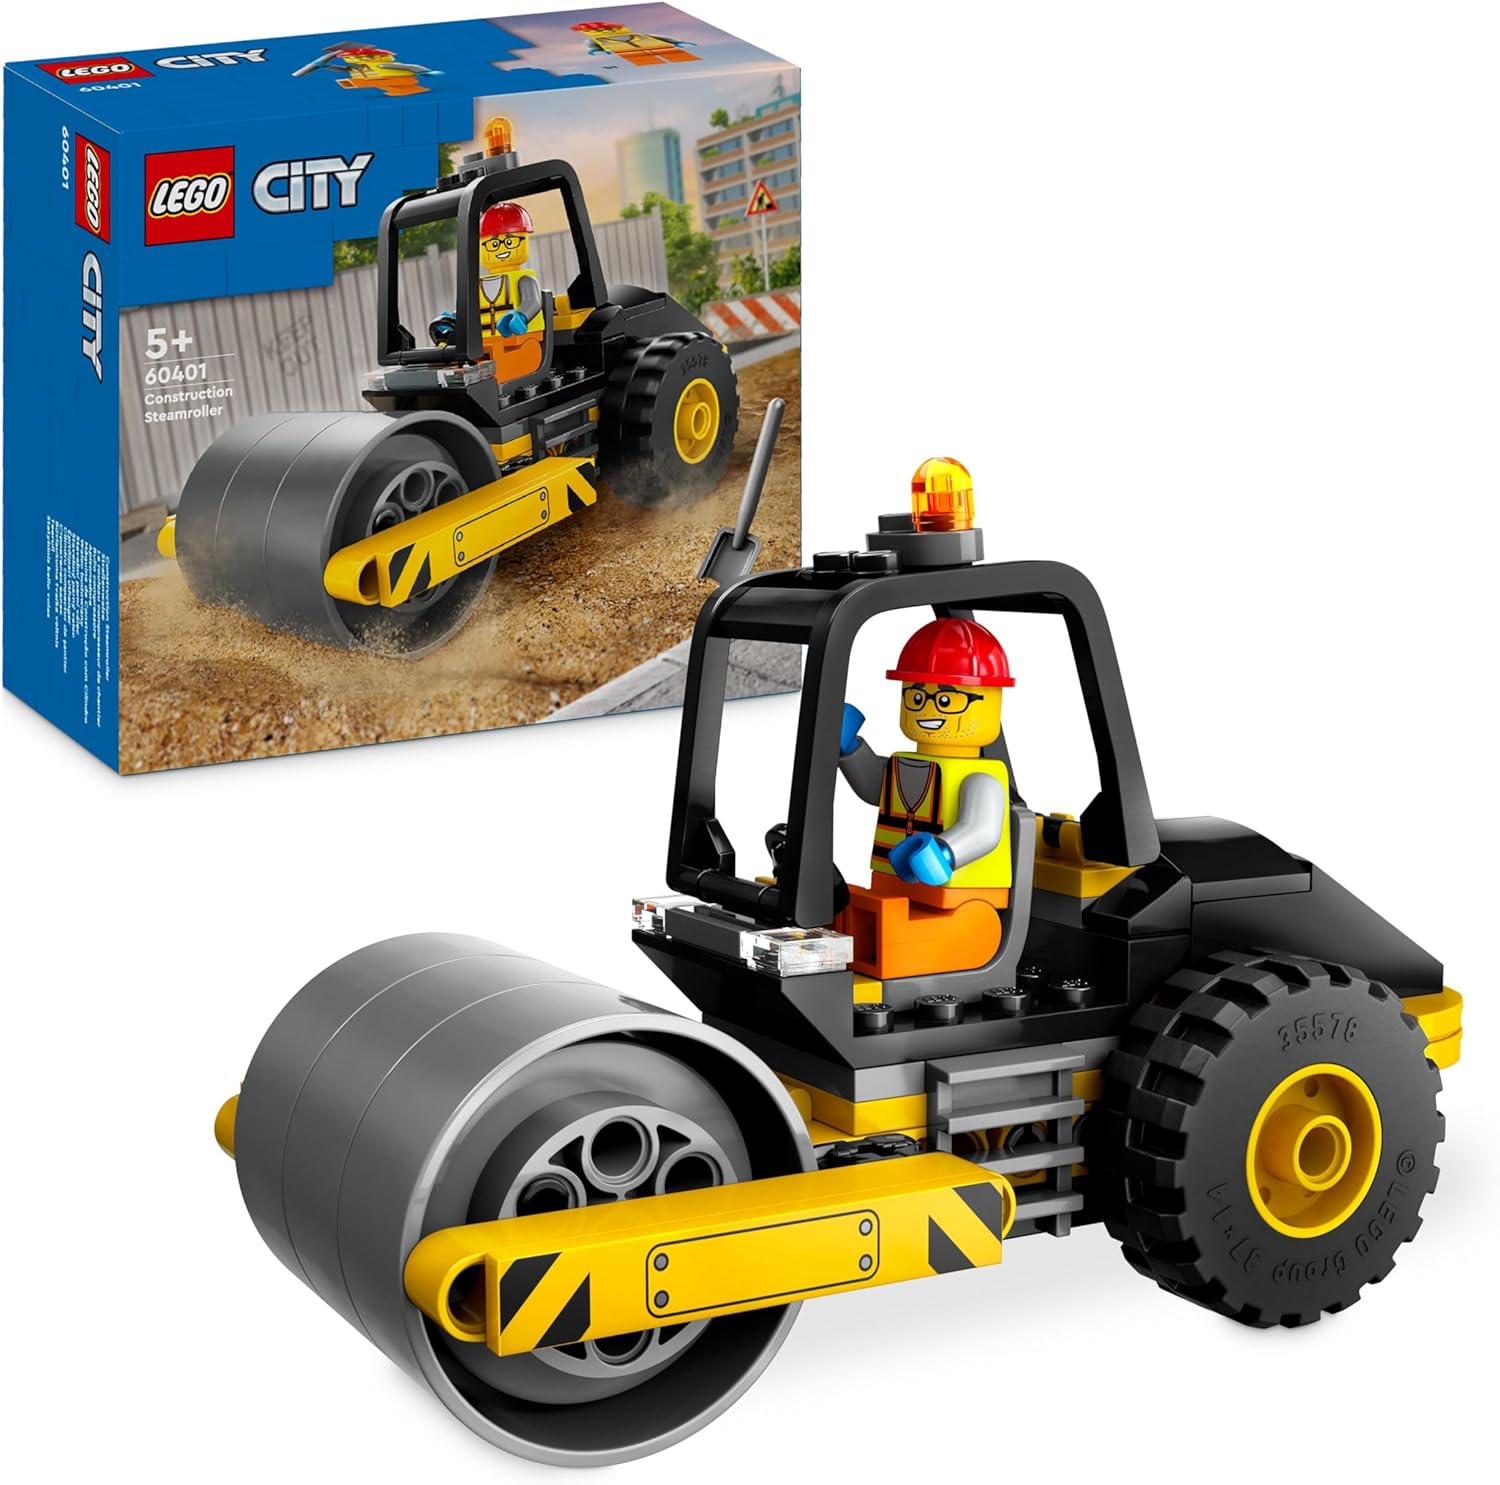 LEGO City Road Roller, Construction Site Vehicle for Children from 5 Years, Steam Roller Toy with Builder Mini Figure, Imaginative Play Experience for Boys and Girls, Small, Funny Gift 60401